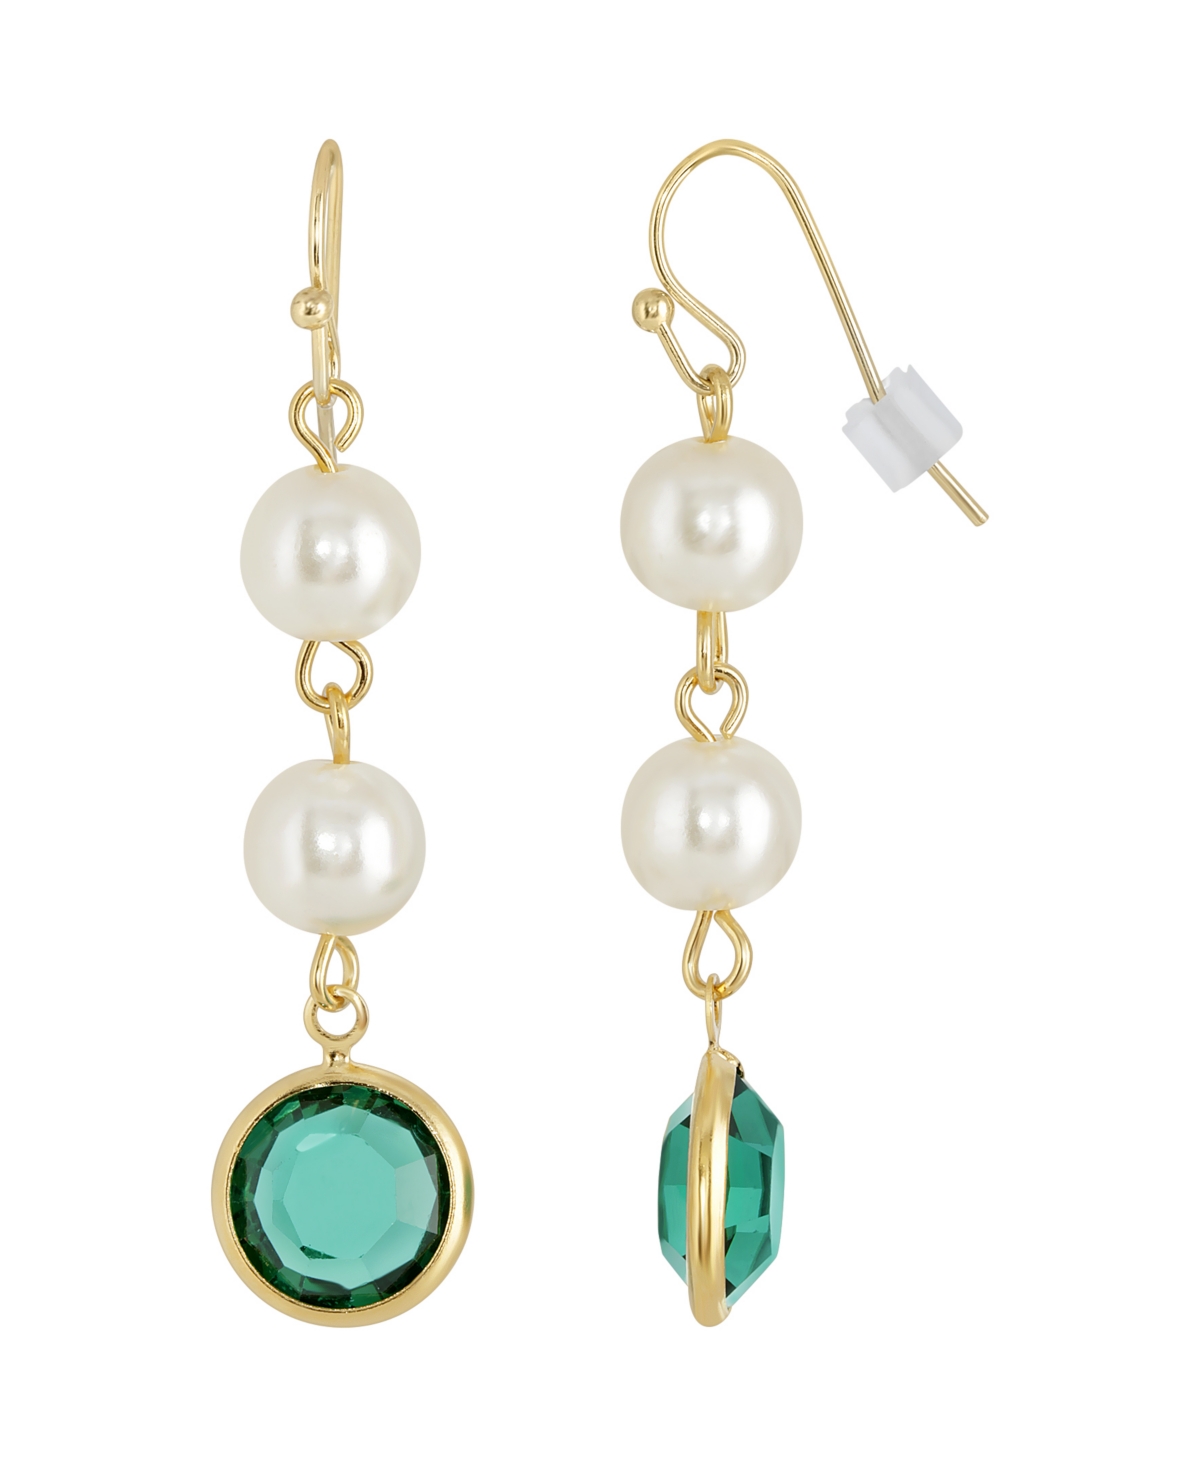 Gold-Tone Imitation Pearl with Dark Green Channels Drop Earring - Green